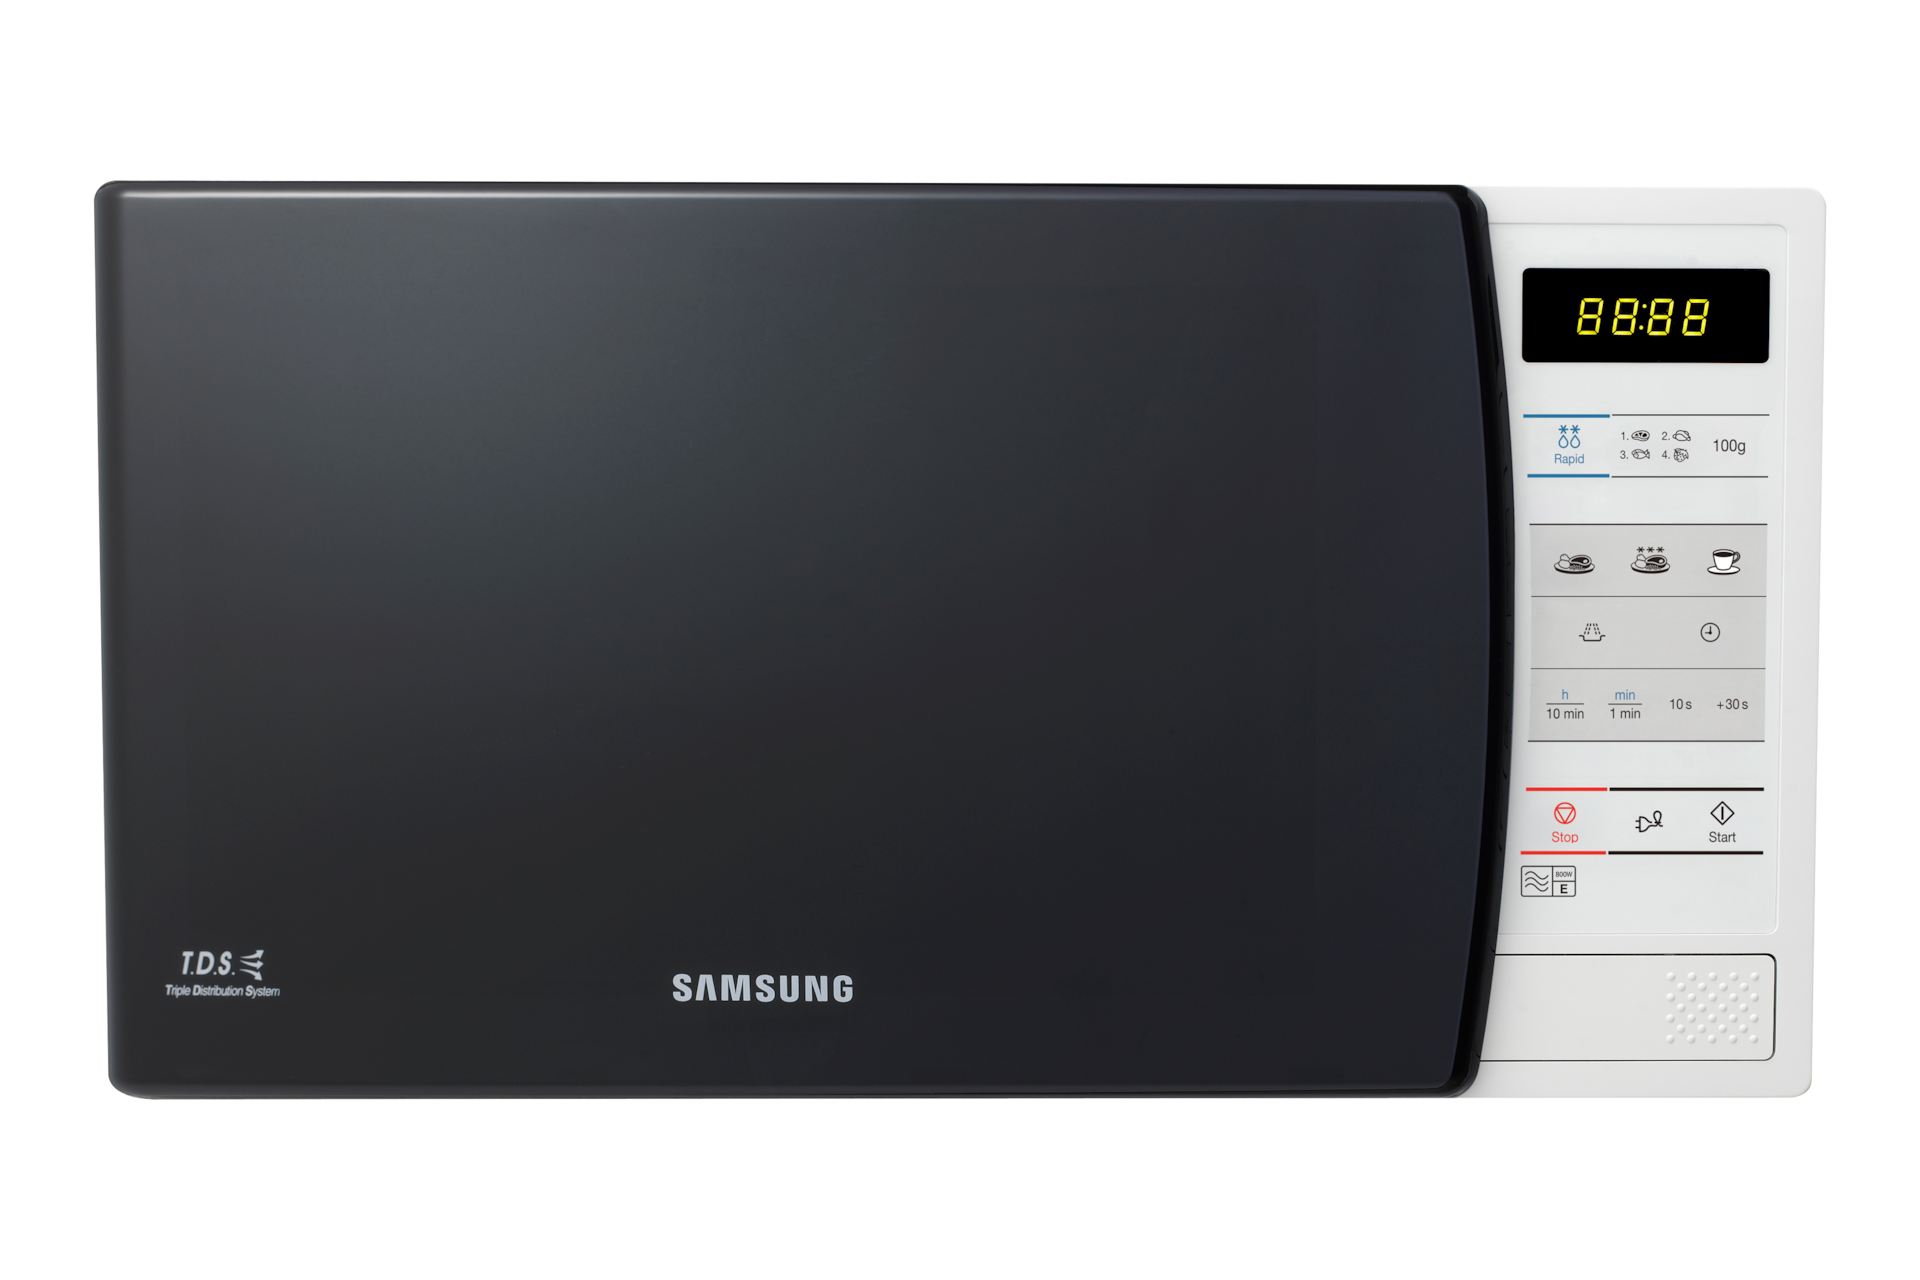 20 Litre ME731K 1150 W LED Solo Microwave Oven | Samsung UK